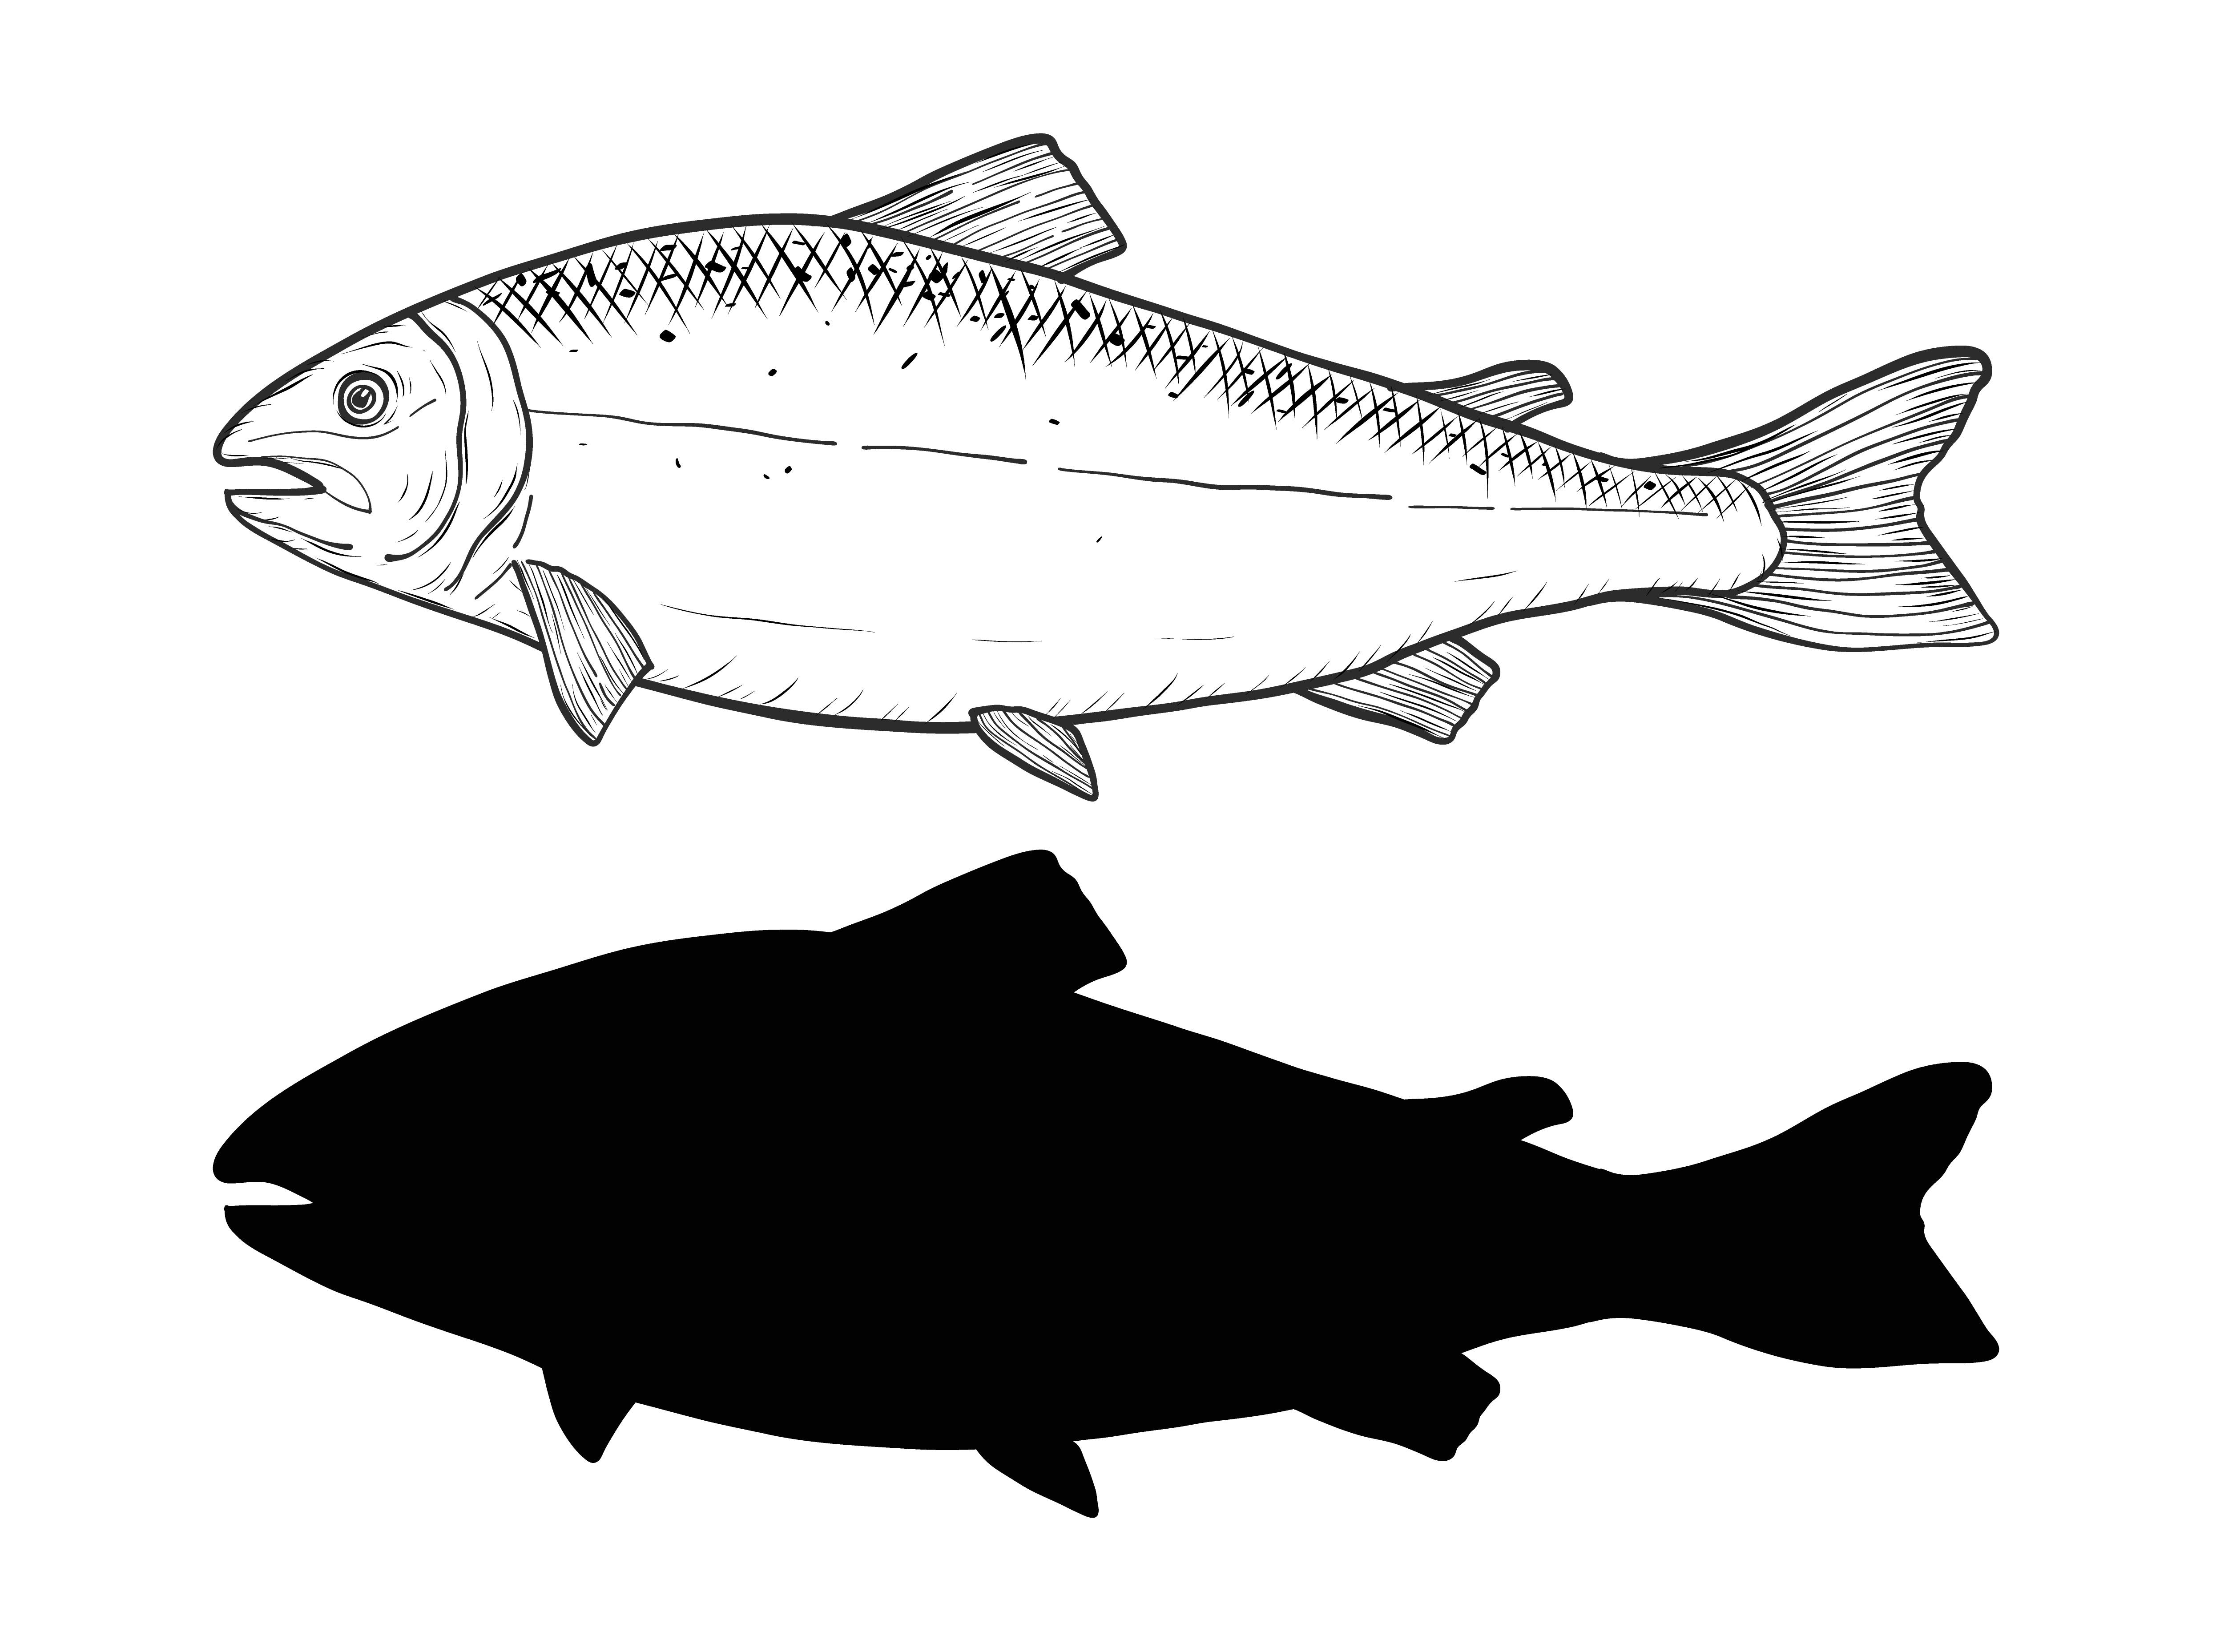 Salmon vector by hand drawing 534731 Free